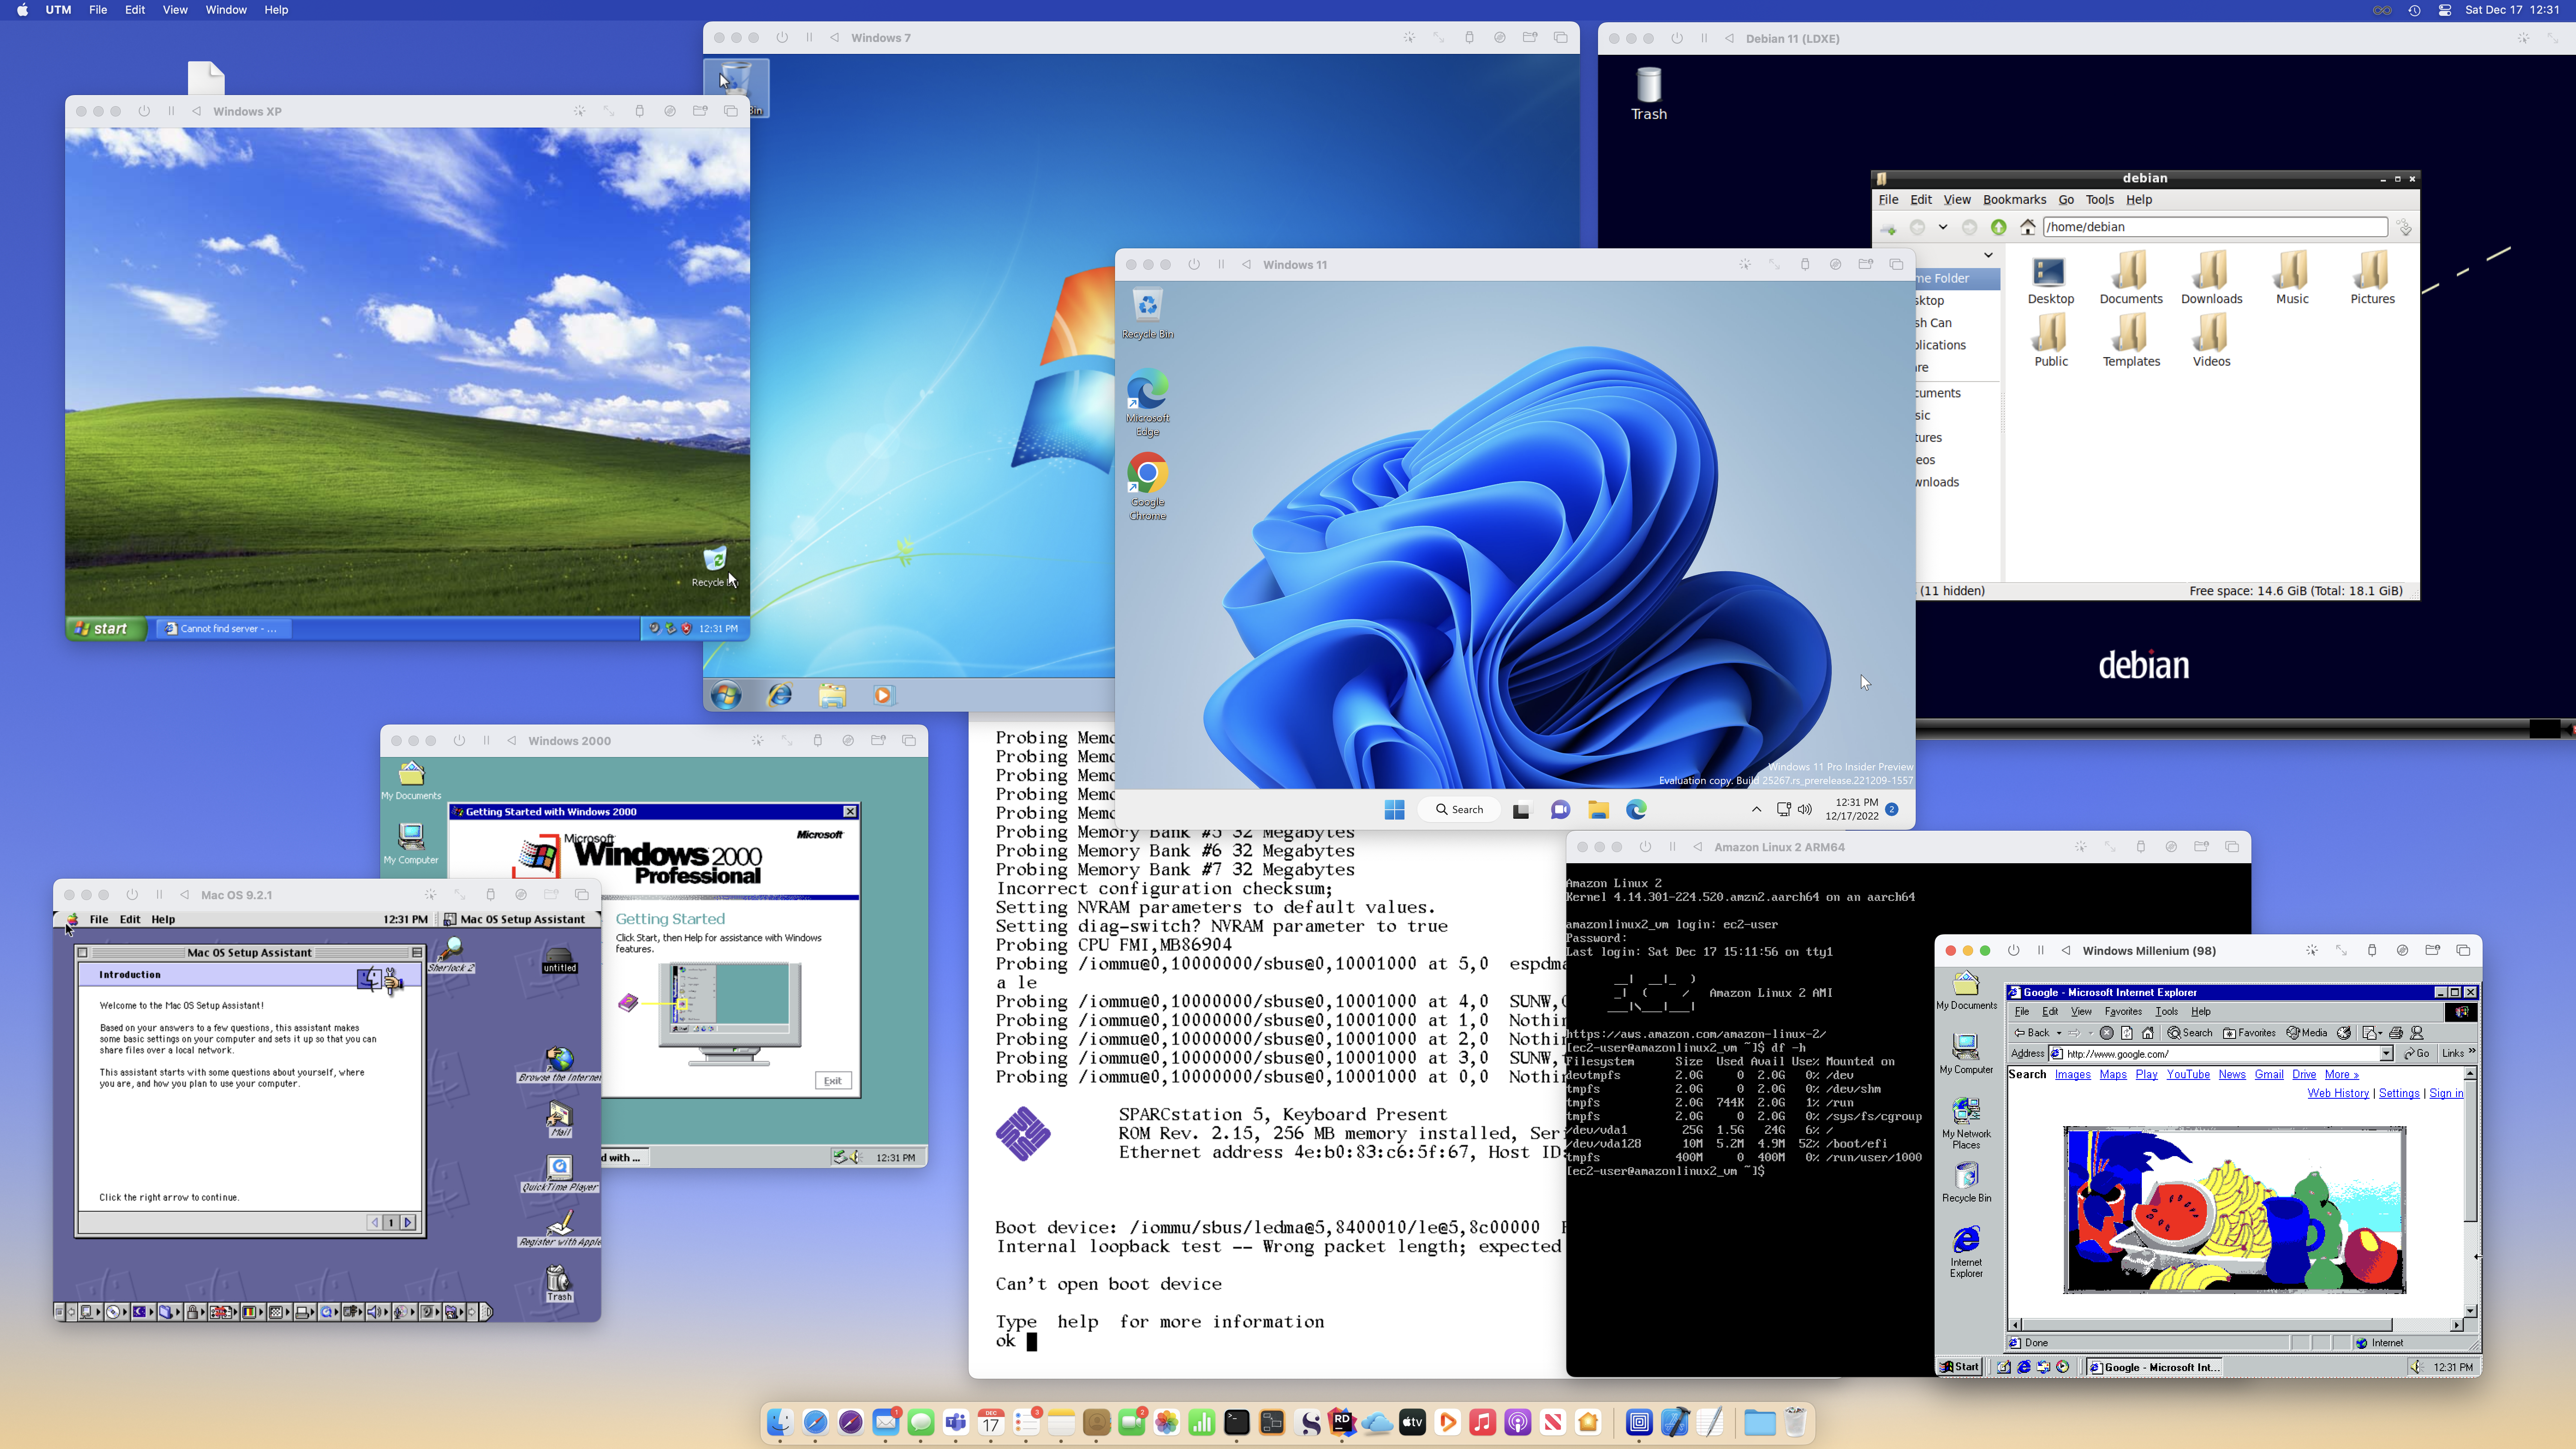 All the operating systems at once!